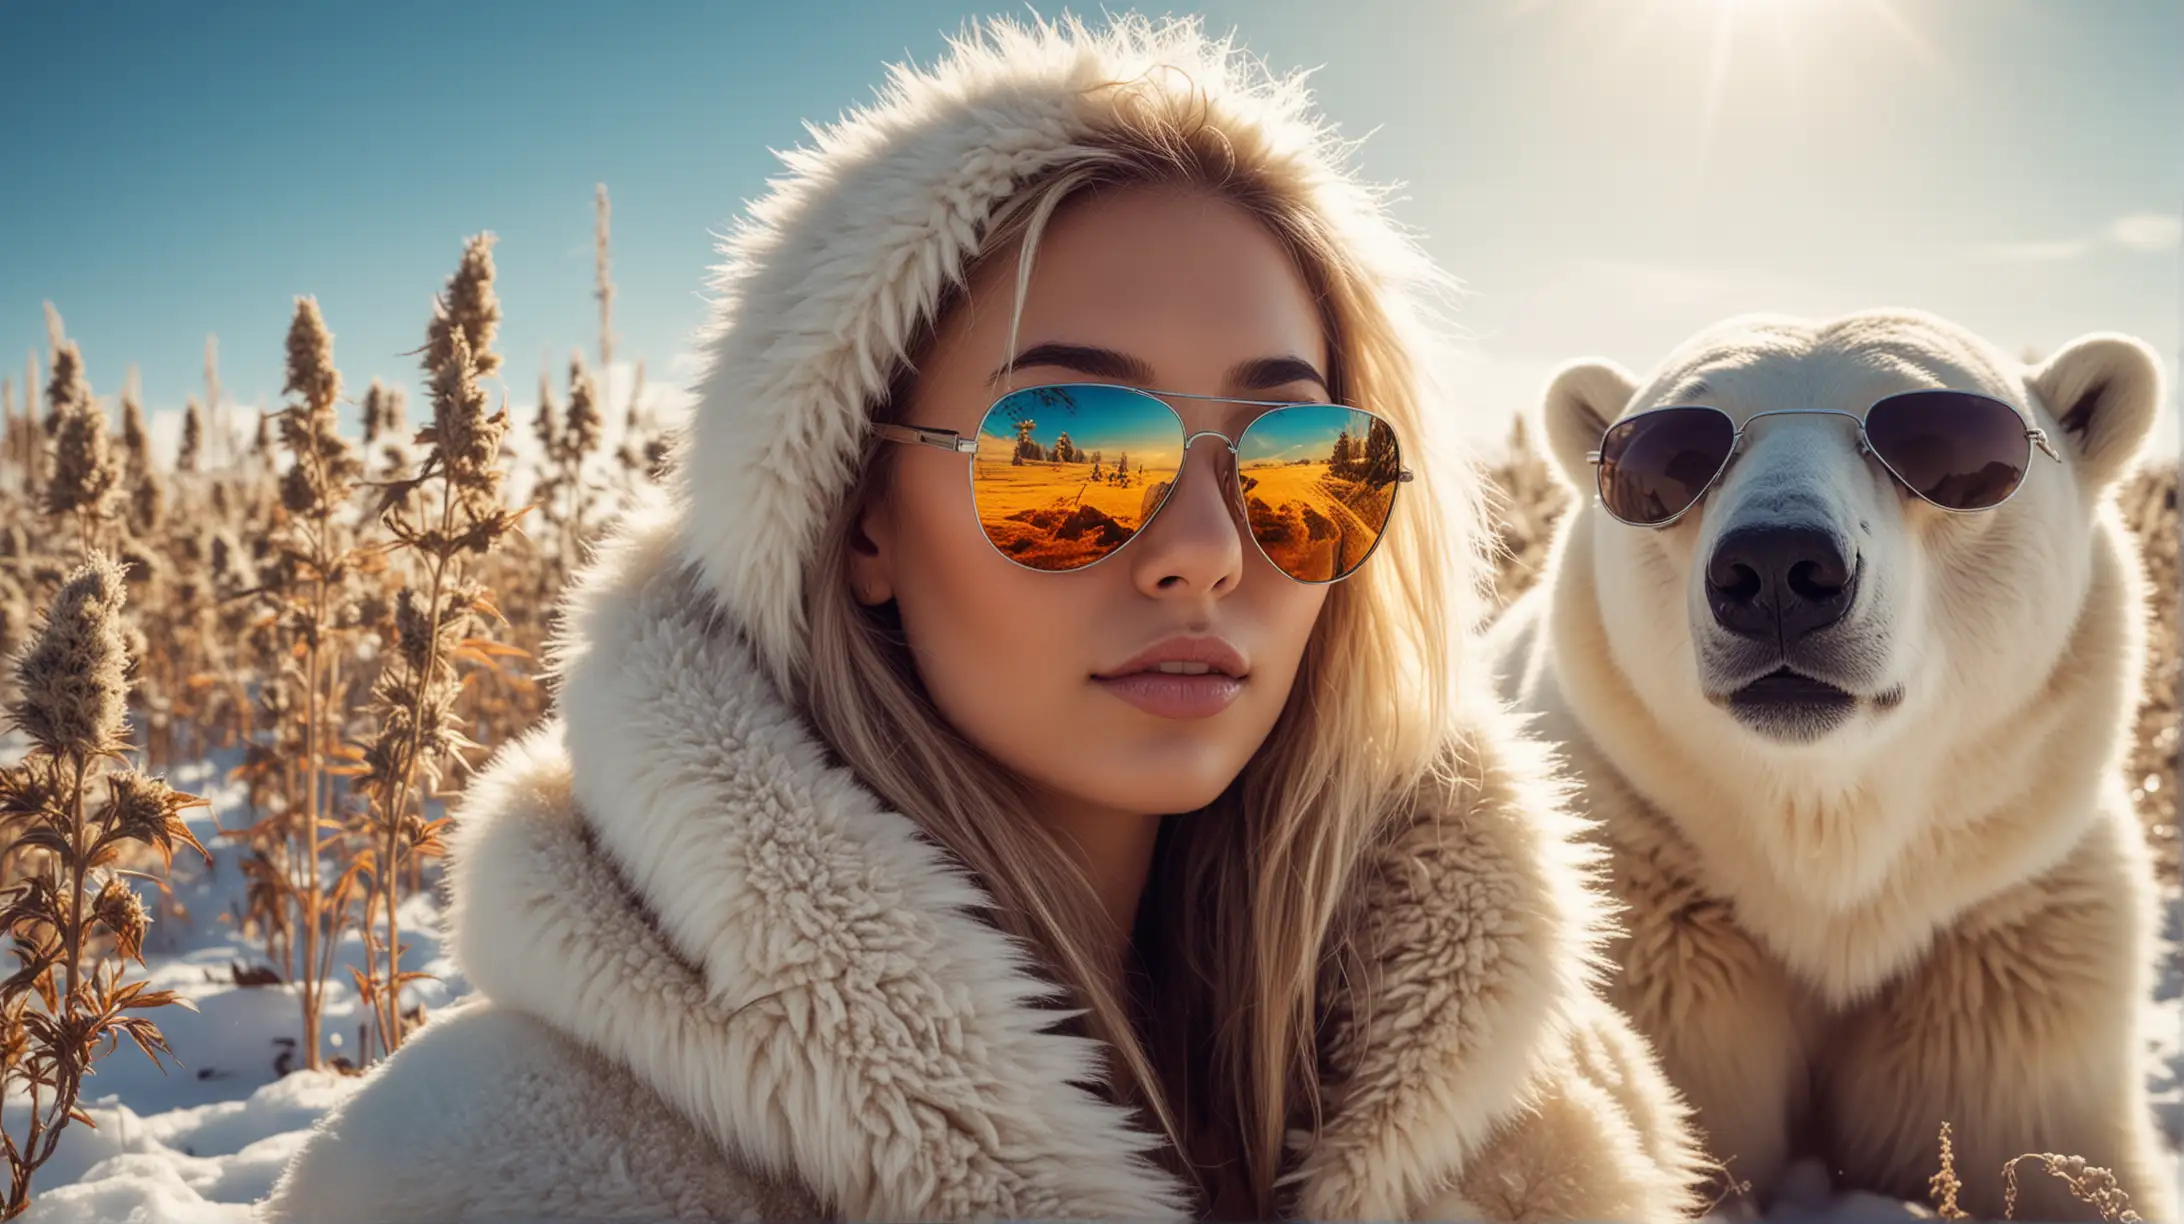 A Sexy Exotic Female wearing sunglasses in a field of cannabis, during winter in the snow with a stoned polar bear, with rich colors, futuristic look, bright sun colors